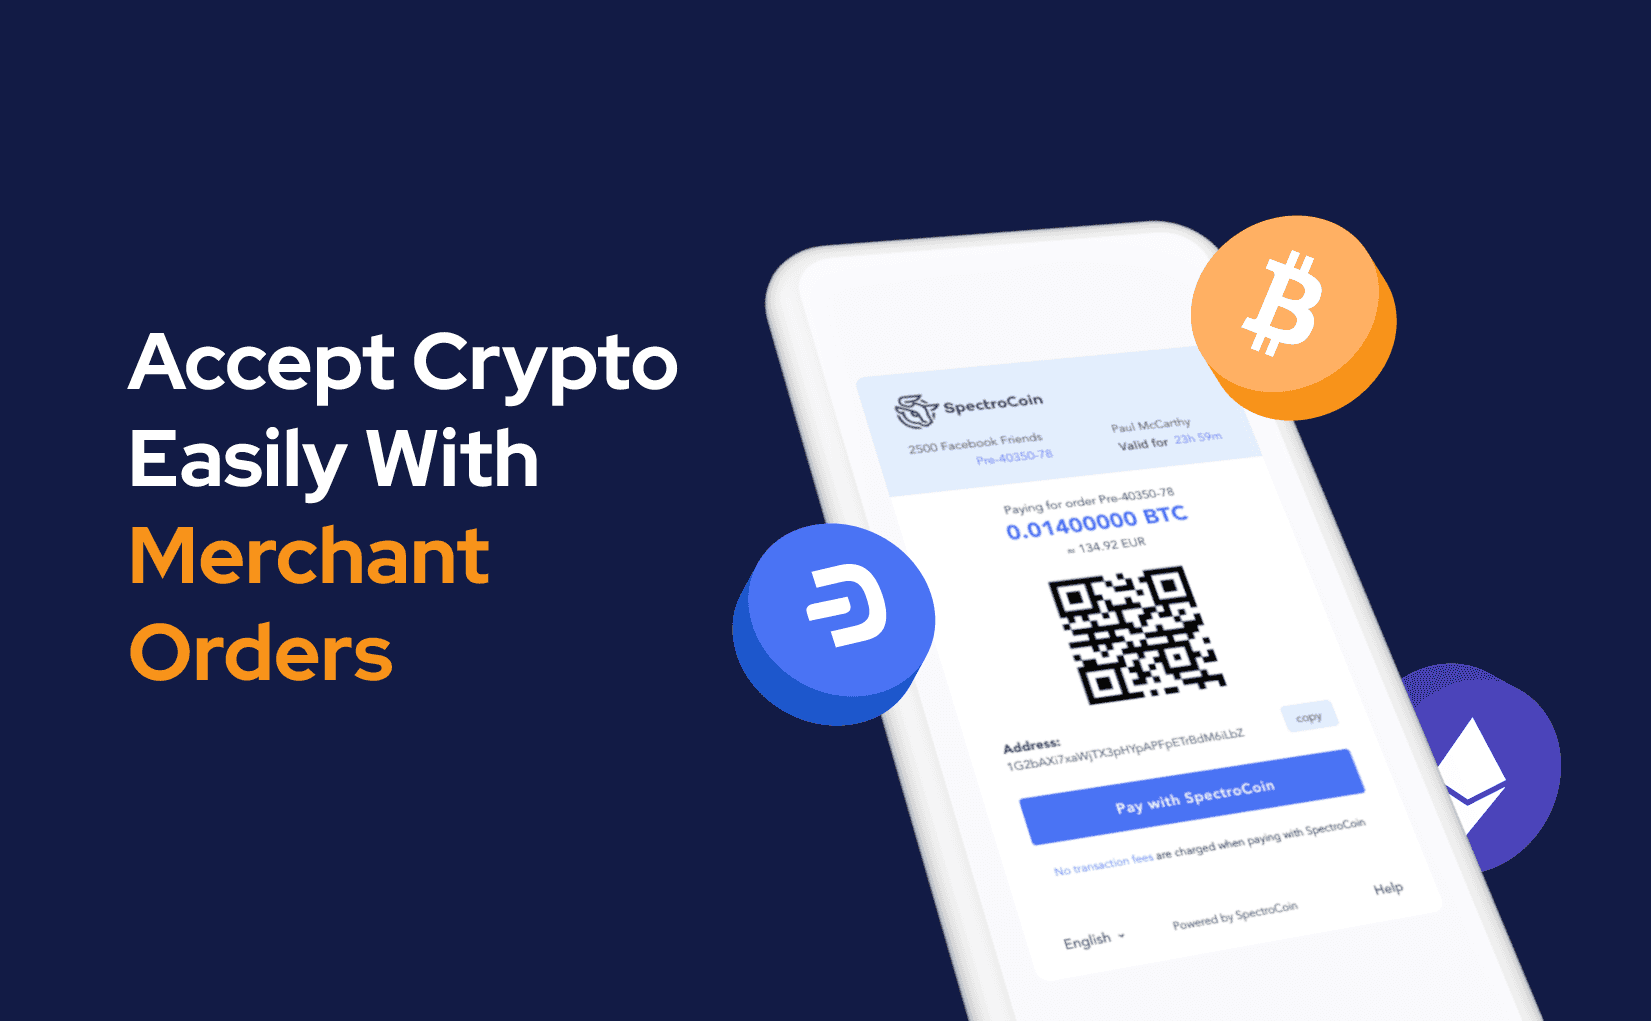 In this blog post, we present merchant orders at SpectroCoin.